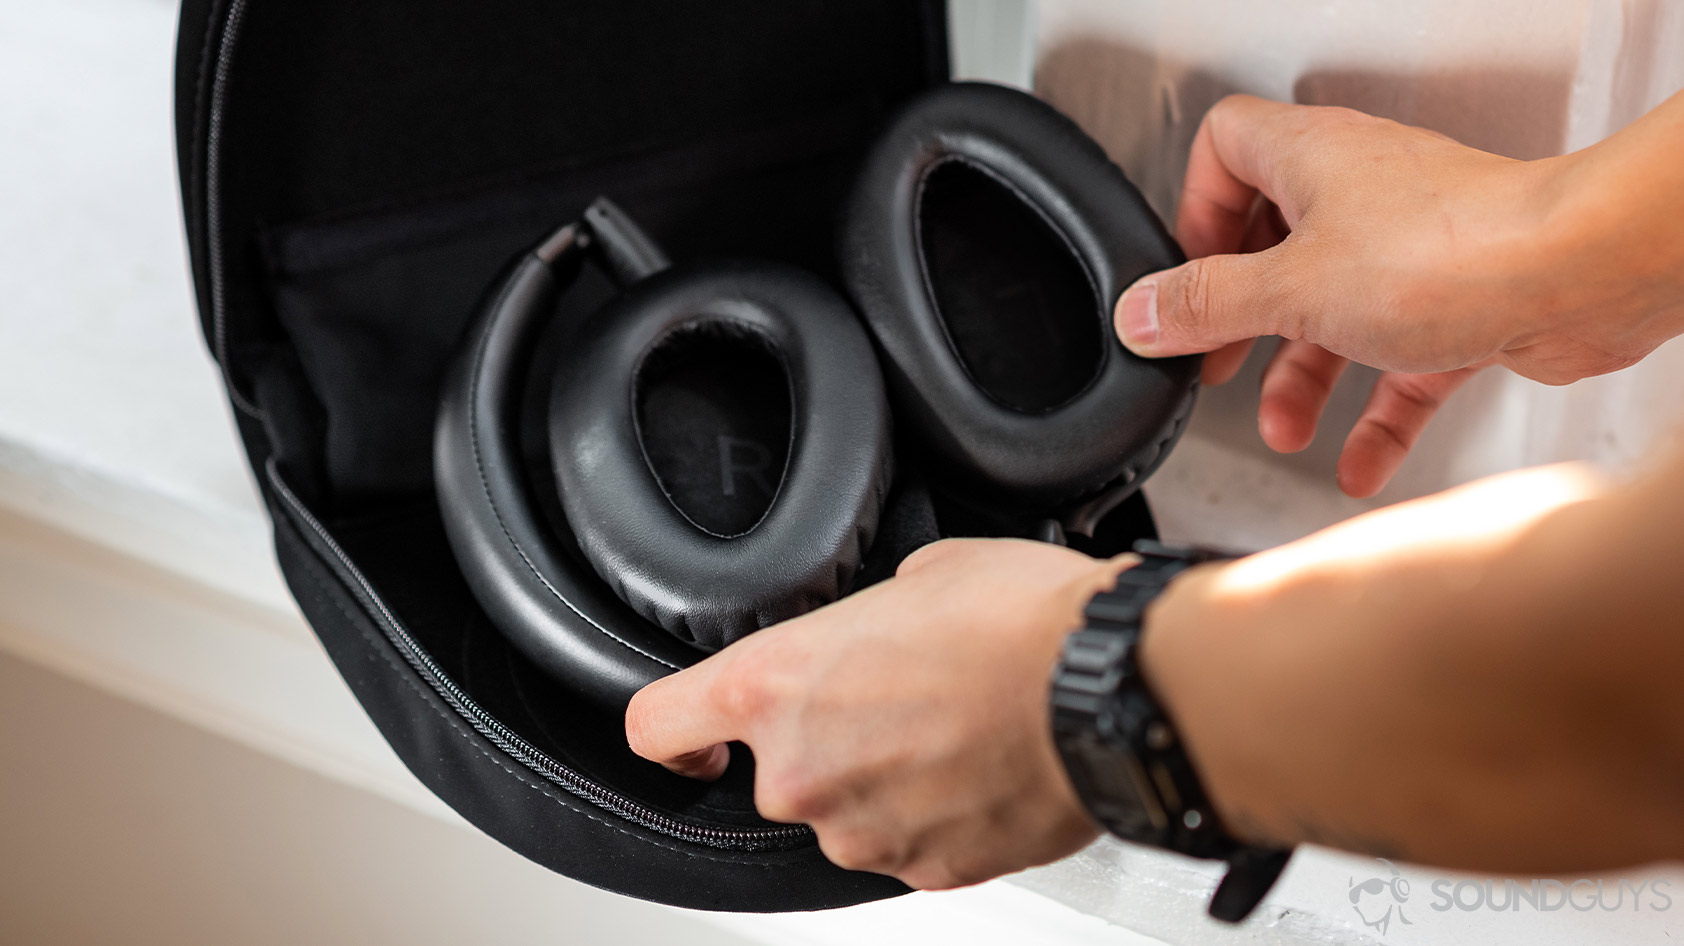 A picture of the Sennheiser PXC 550-II noise canceling headphones being placed into the travel case.